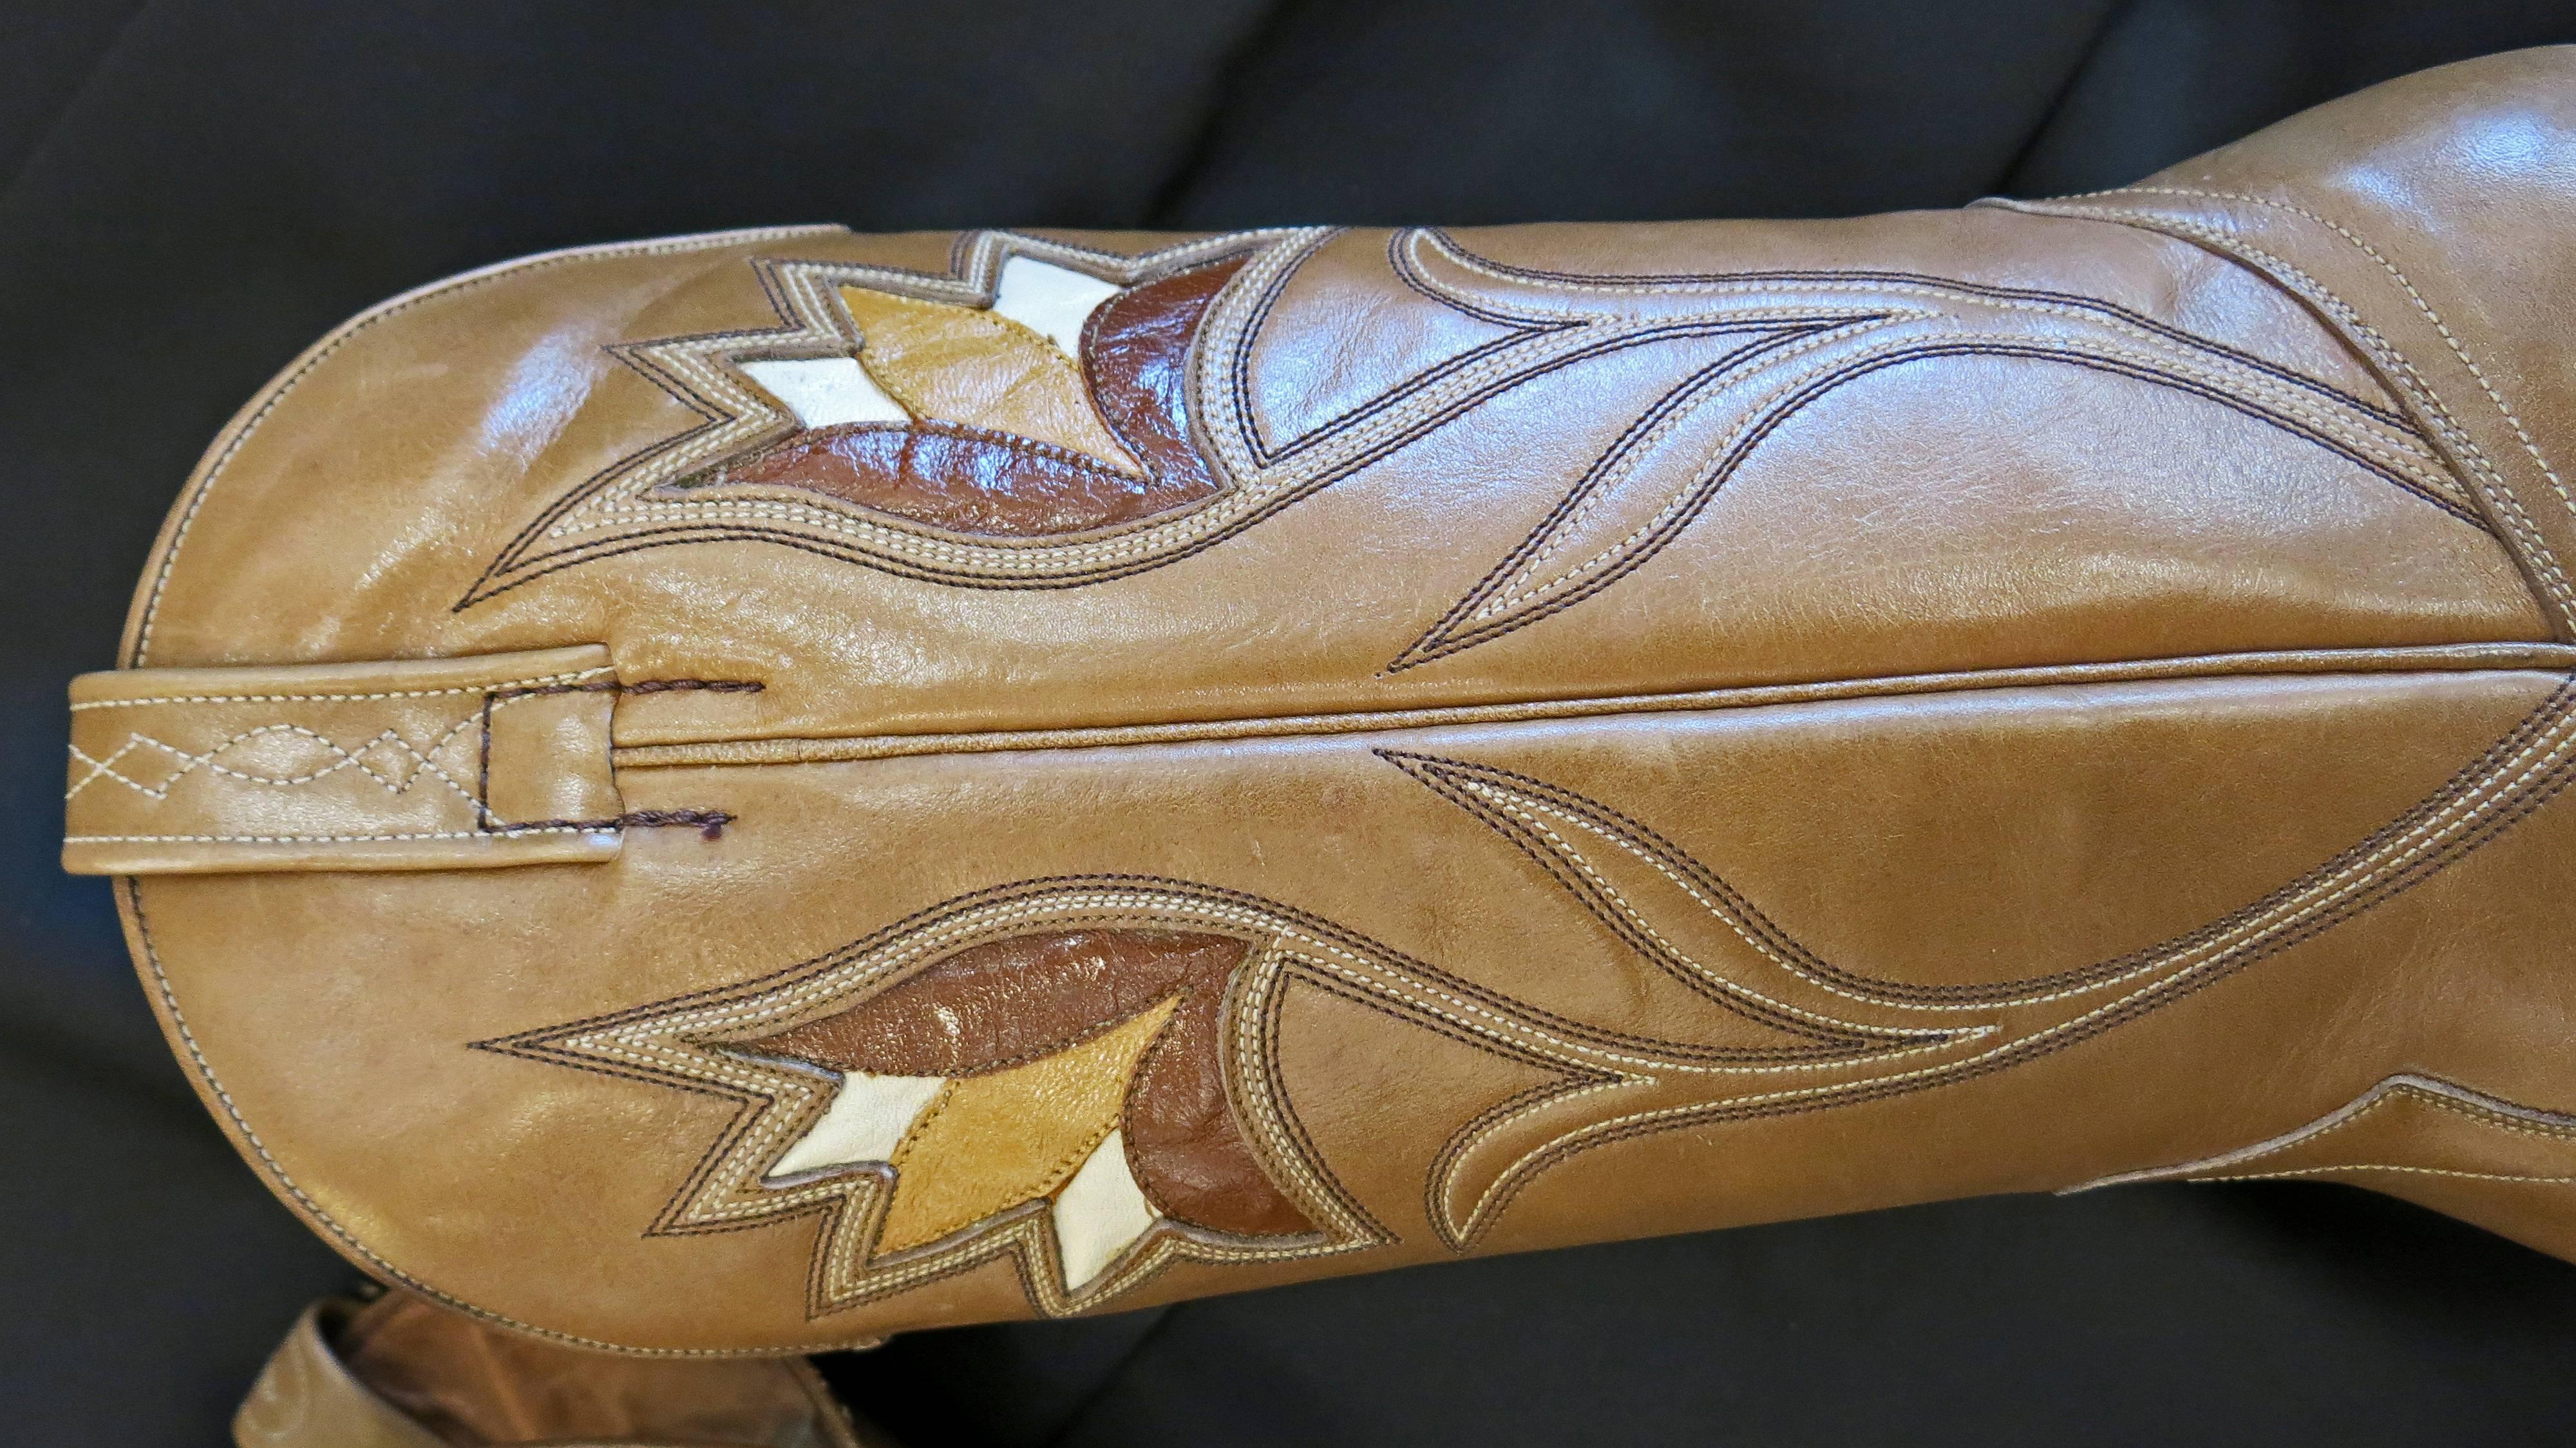 Light brown leather boots with inlay flower designs on both sides and decorative stitching throughout. Very beautiful and eye-catching design. Wooden heel and sole. 11.5